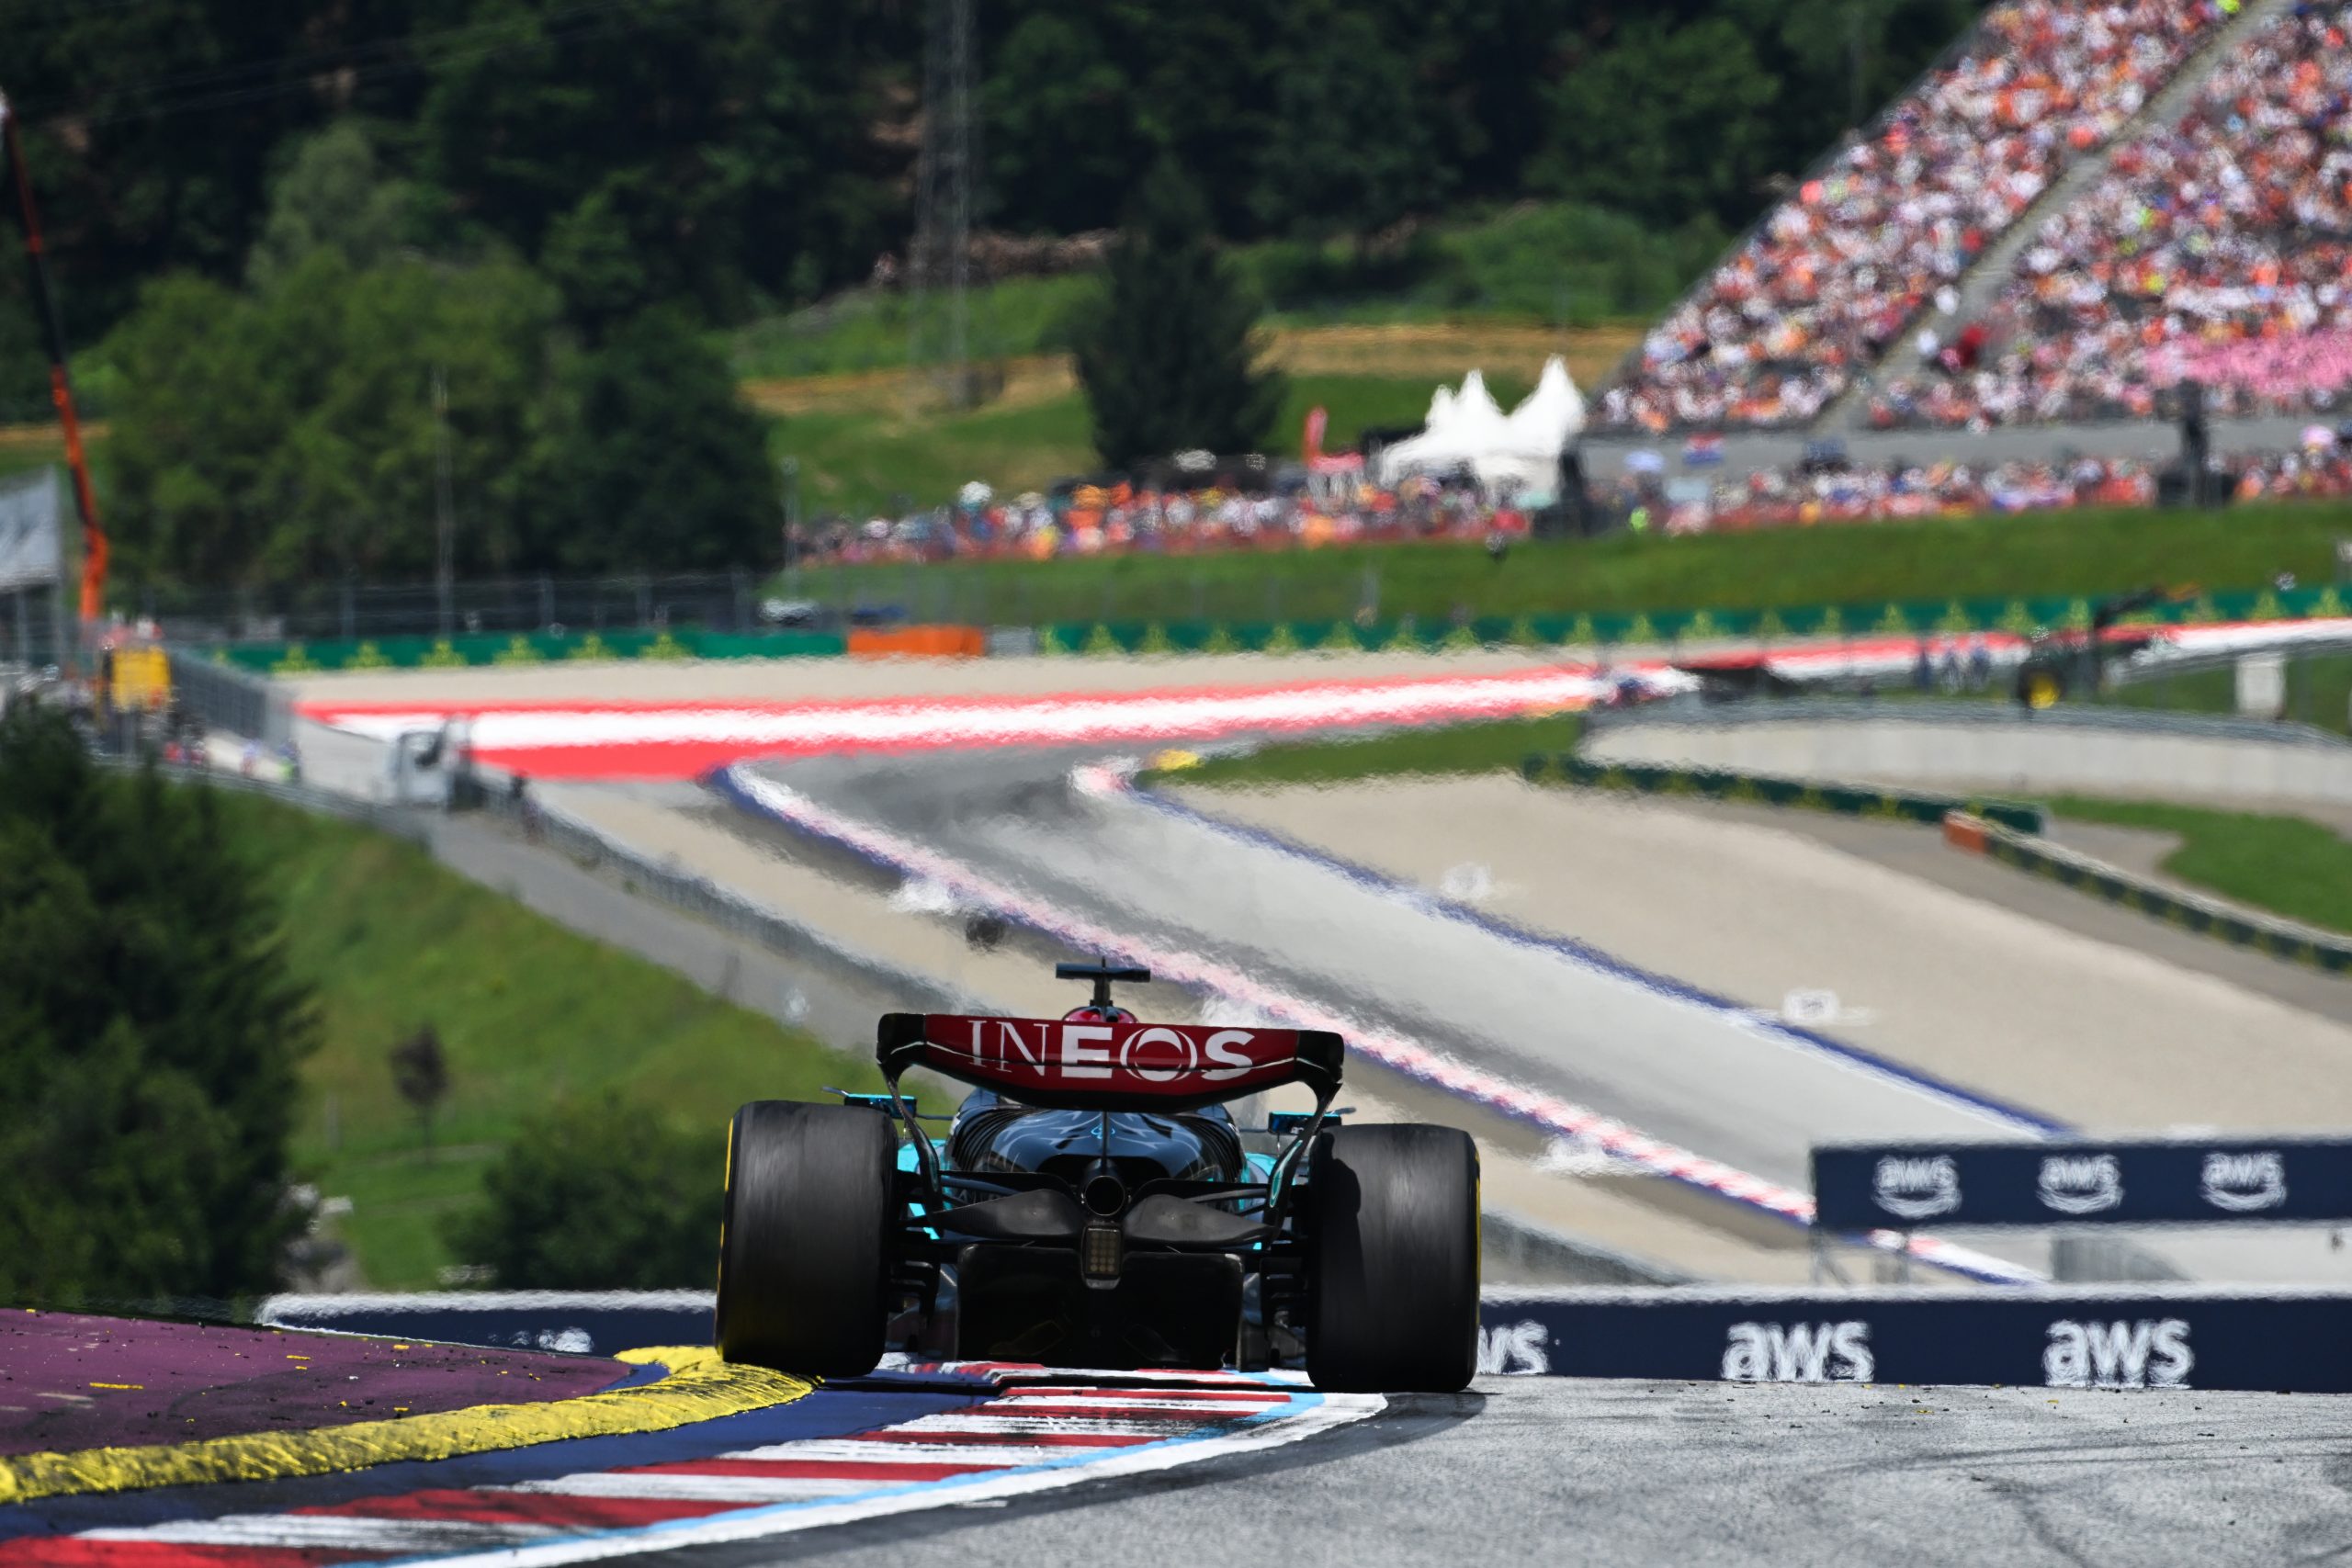 Formel 1 - Mercedes-AMG Petronas Motorsport, Großer Preis von Österreich 2024. George Russell Formula One - Mercedes-AMG Petronas Motorsport, Austrian GP 2024. George Russell George Russell (63) on track in his Mercedes AMG F1 W15 during the 2024 Austrian Grand Prix at the Red Bull Ring (Source: Mercedes AMG)